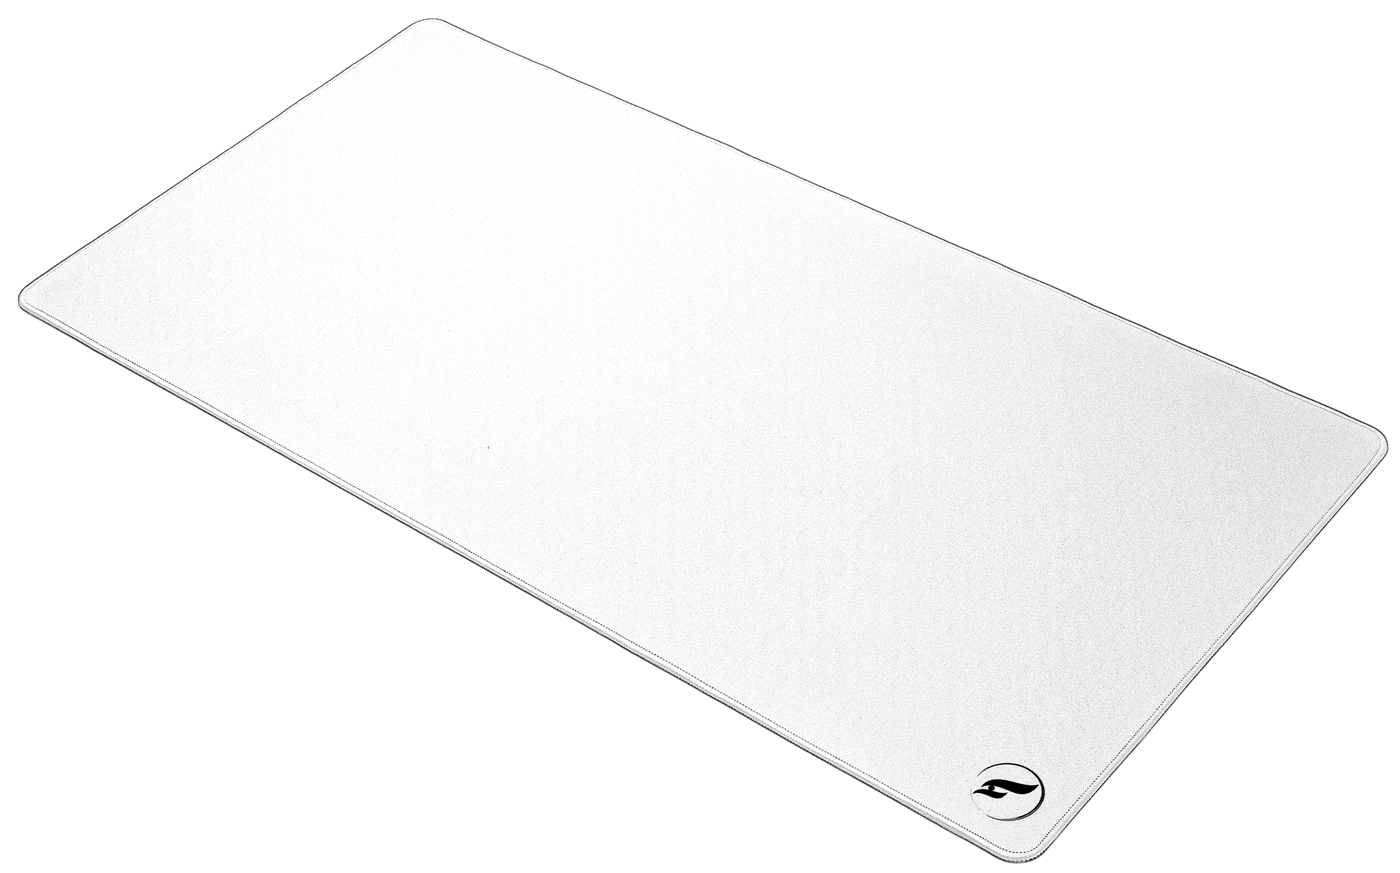 Infinity 2XL white hybrid gaming mouse pad Odin Gaming